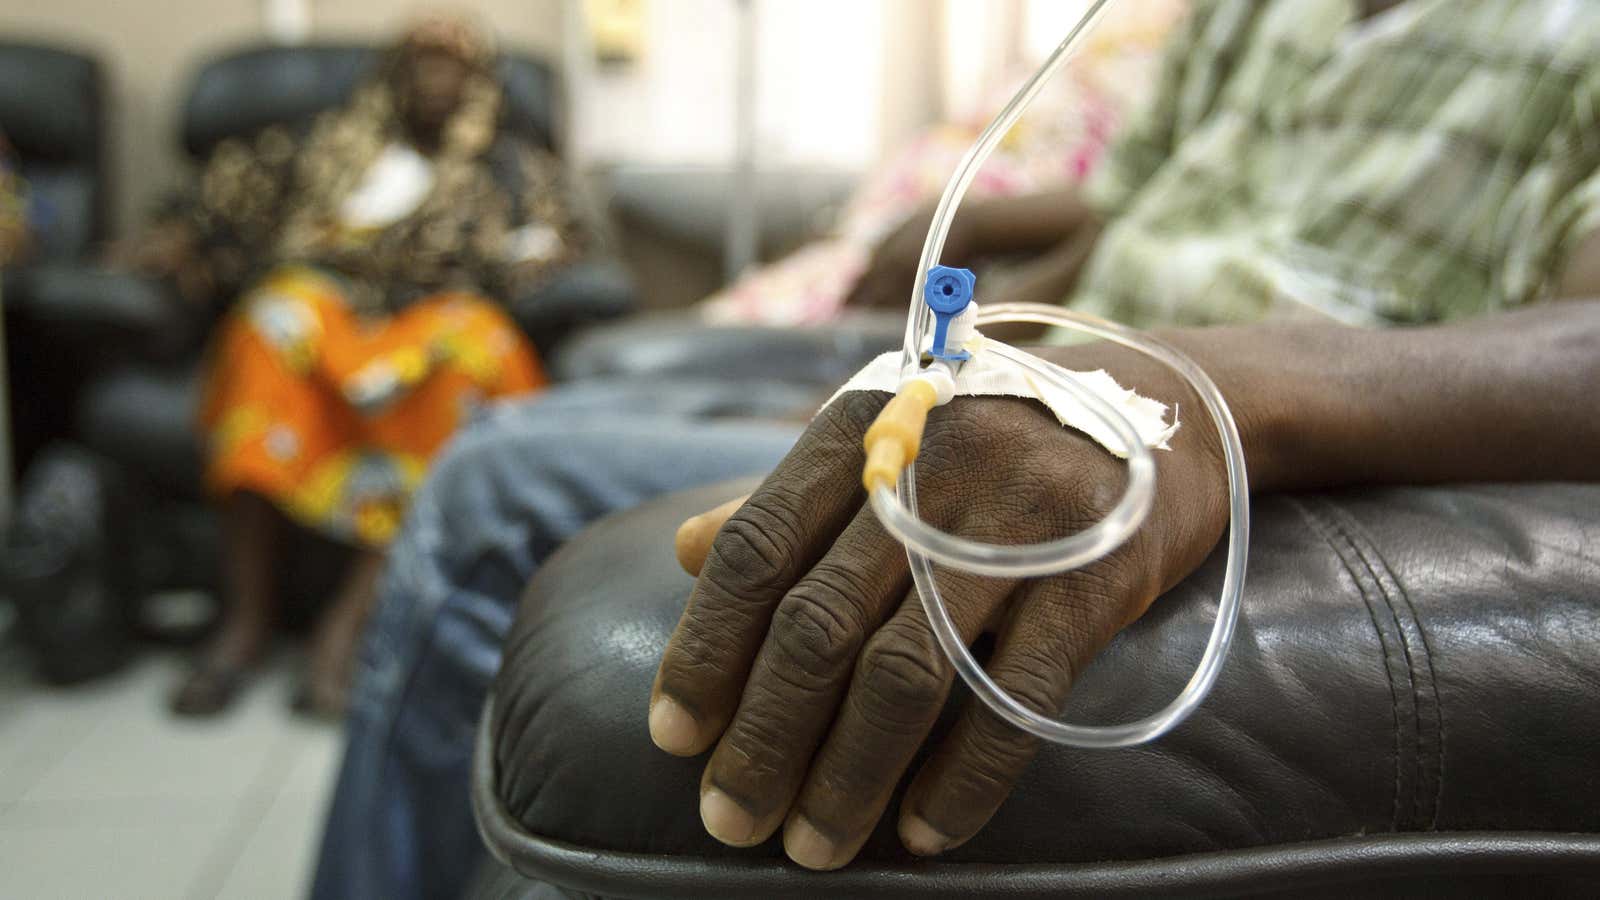 Cancer patients sit in a chemotherapy ward while receiving treatment in Accra, Ghana.